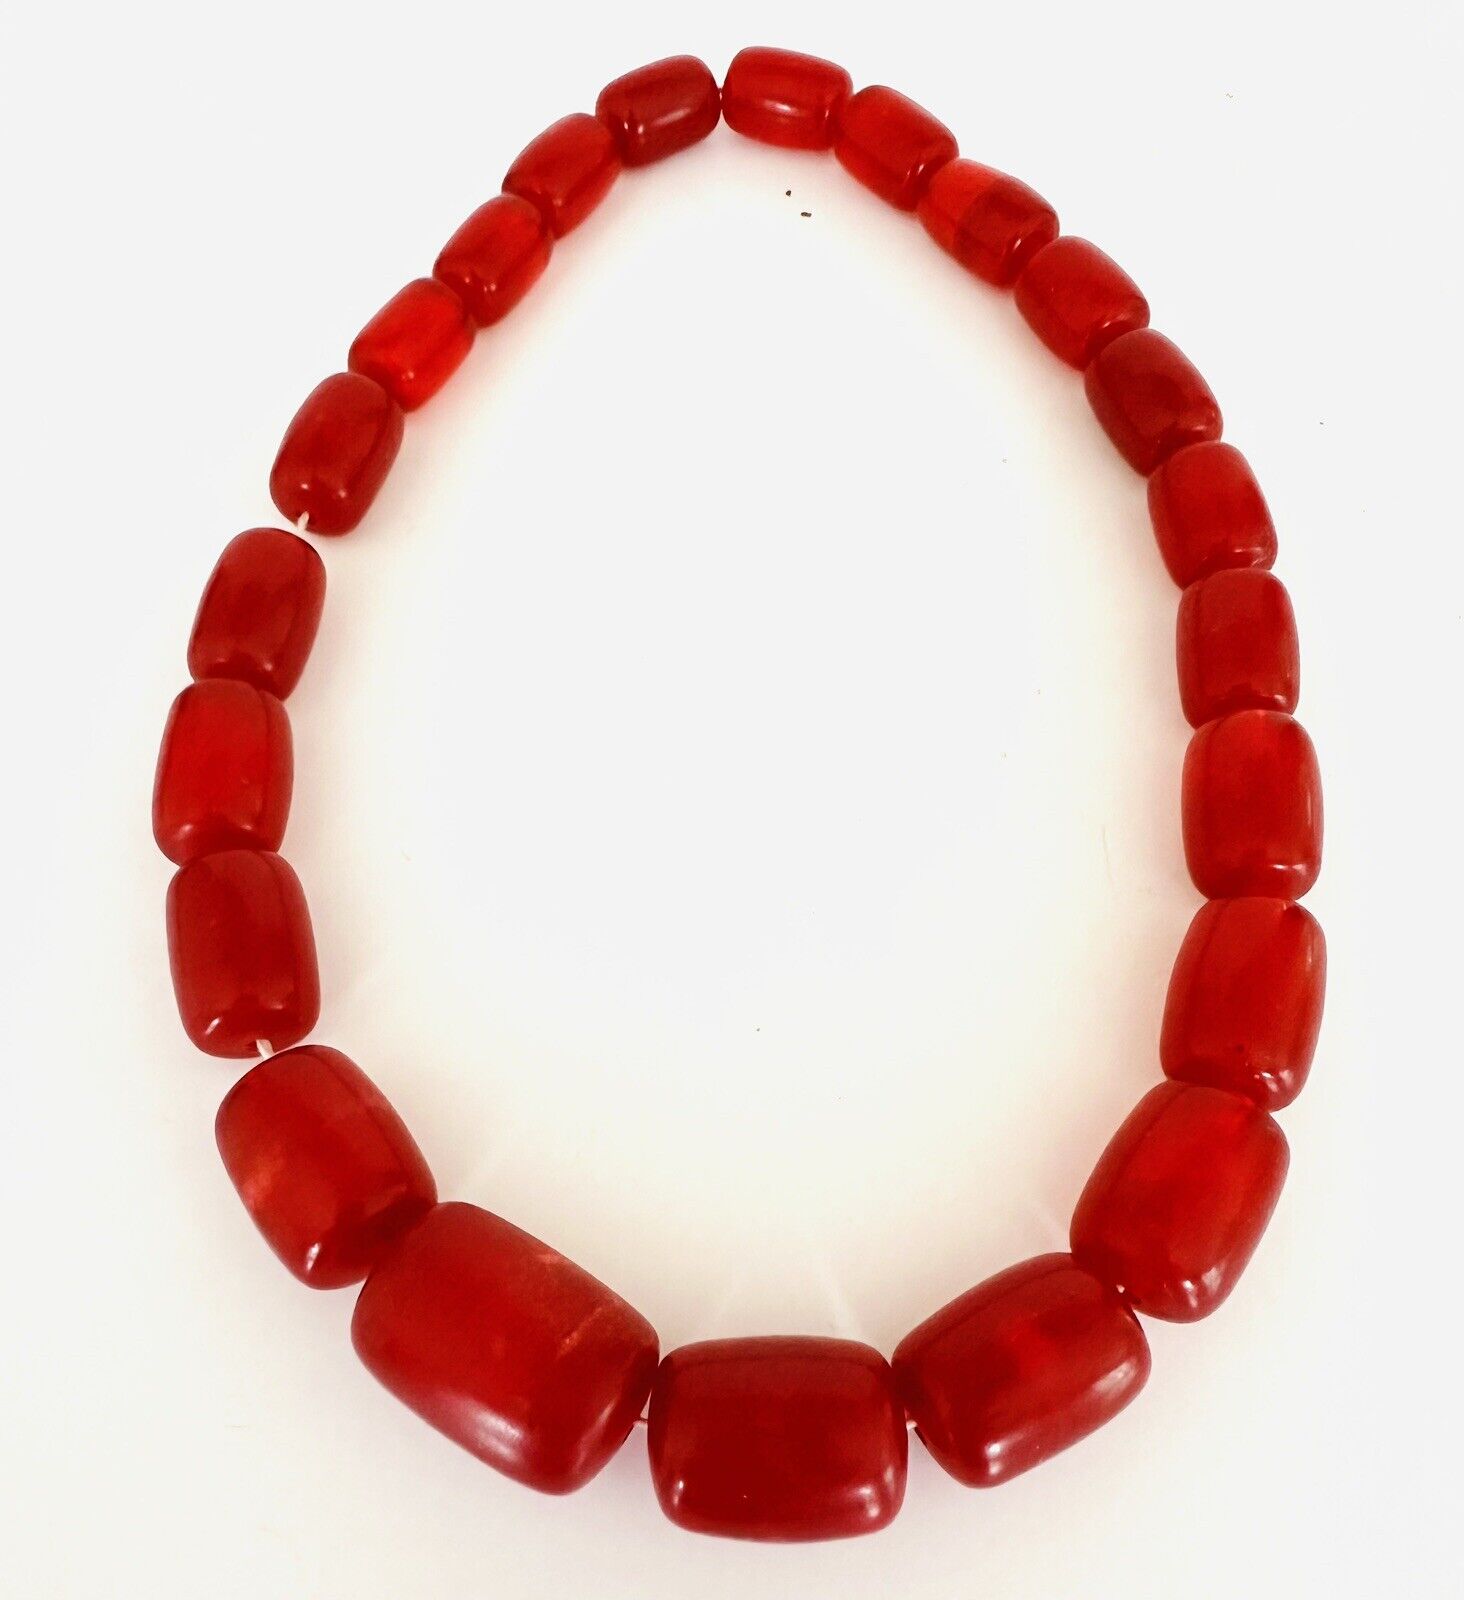 Vintage Cherry Red Amber Bakelite? / Lucite? Barrel Beads Necklace Clasp 48 grms